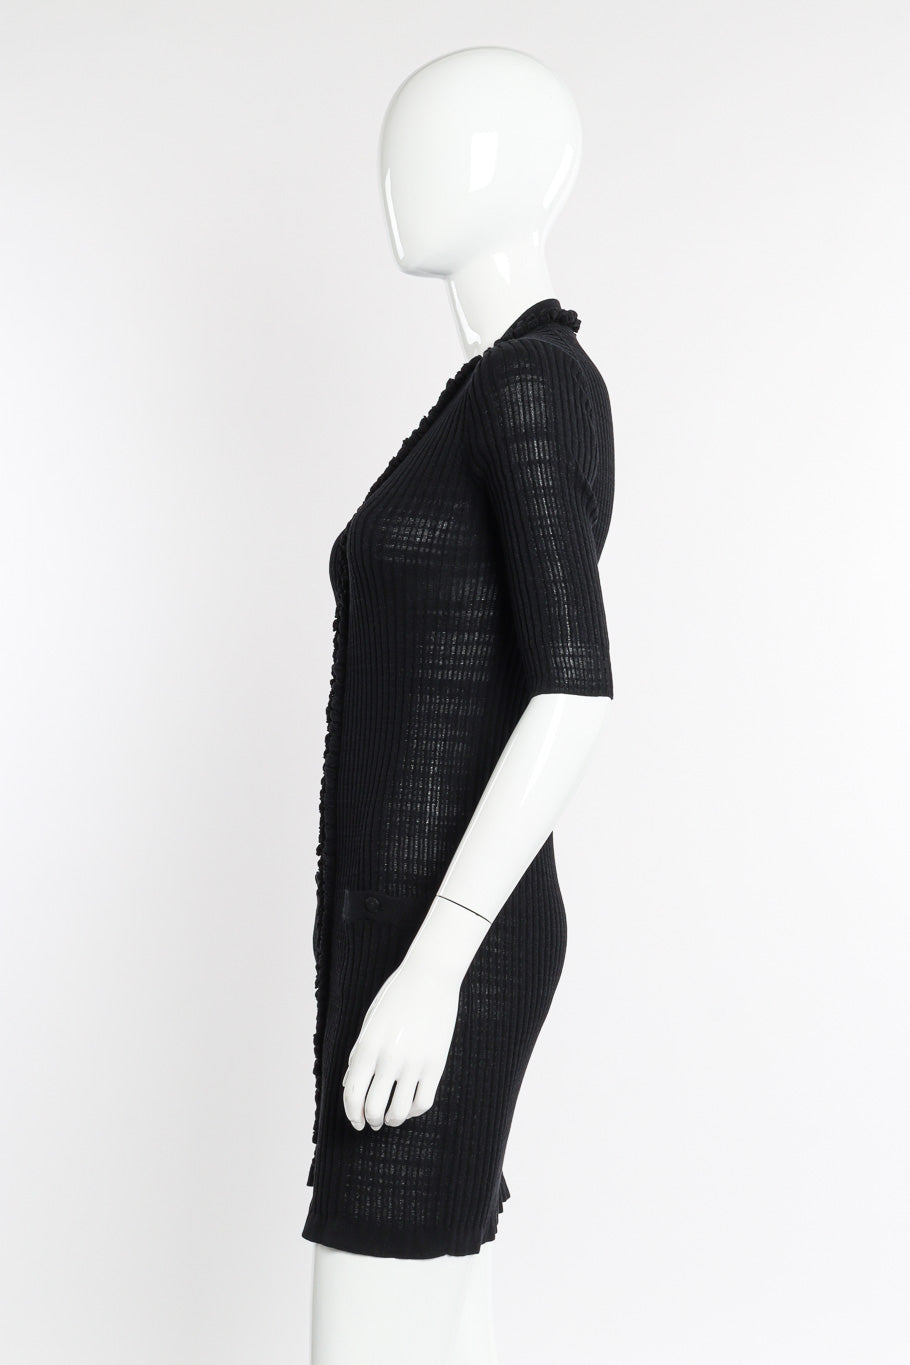 Chanel Ribbed Knit Cardigan side view on mannequin @Recessla